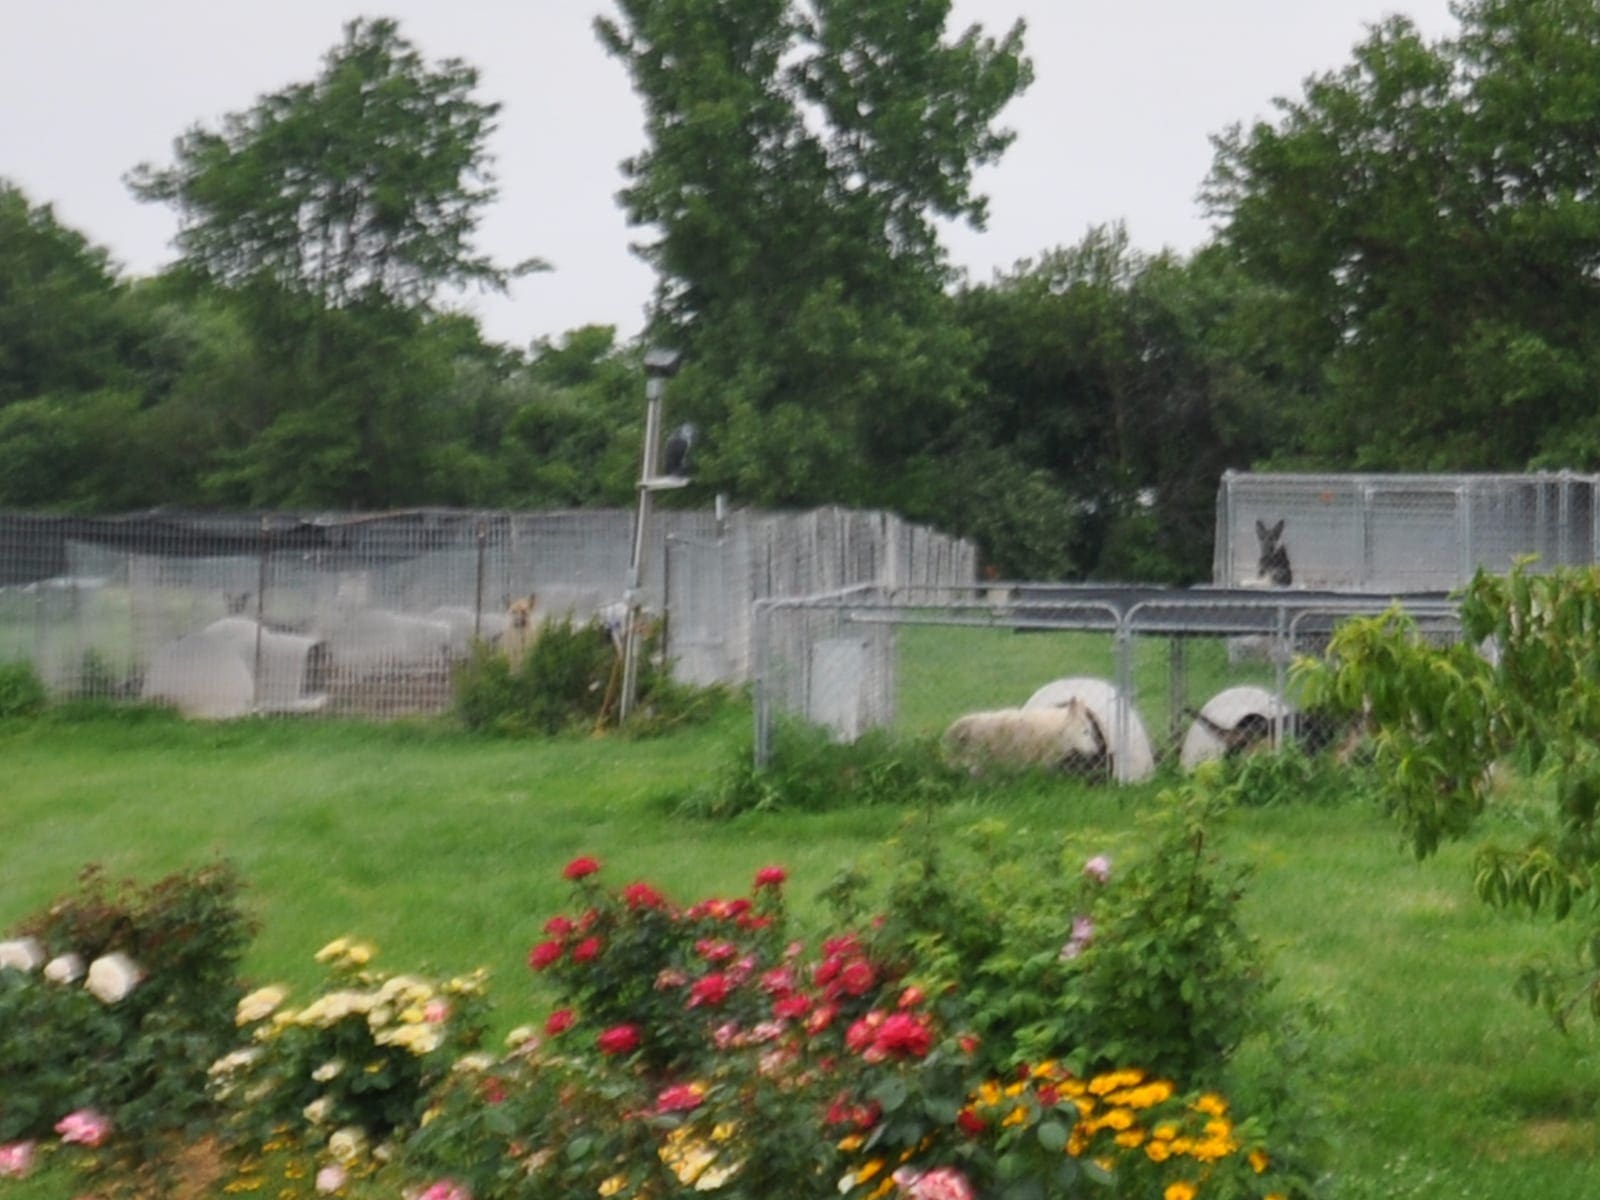 Photo by Margaret Menge (June 2019, Indiana). At AKC Breeder of Merit Rachel Clark's kennel, puppies and some adult dogs live indoors in an expanded garage. The remaining dogs are housed in several outdoor chain-link or steel wire kennels on an unfenced plot of grass behind the house. Most kennels are either 10 by 20 feet or 16 by 16 feet with two dogs each in each. Breeder of Merit Clark does not live on site. A full-time, live-in caretaker is primarily responsible for the dogs.